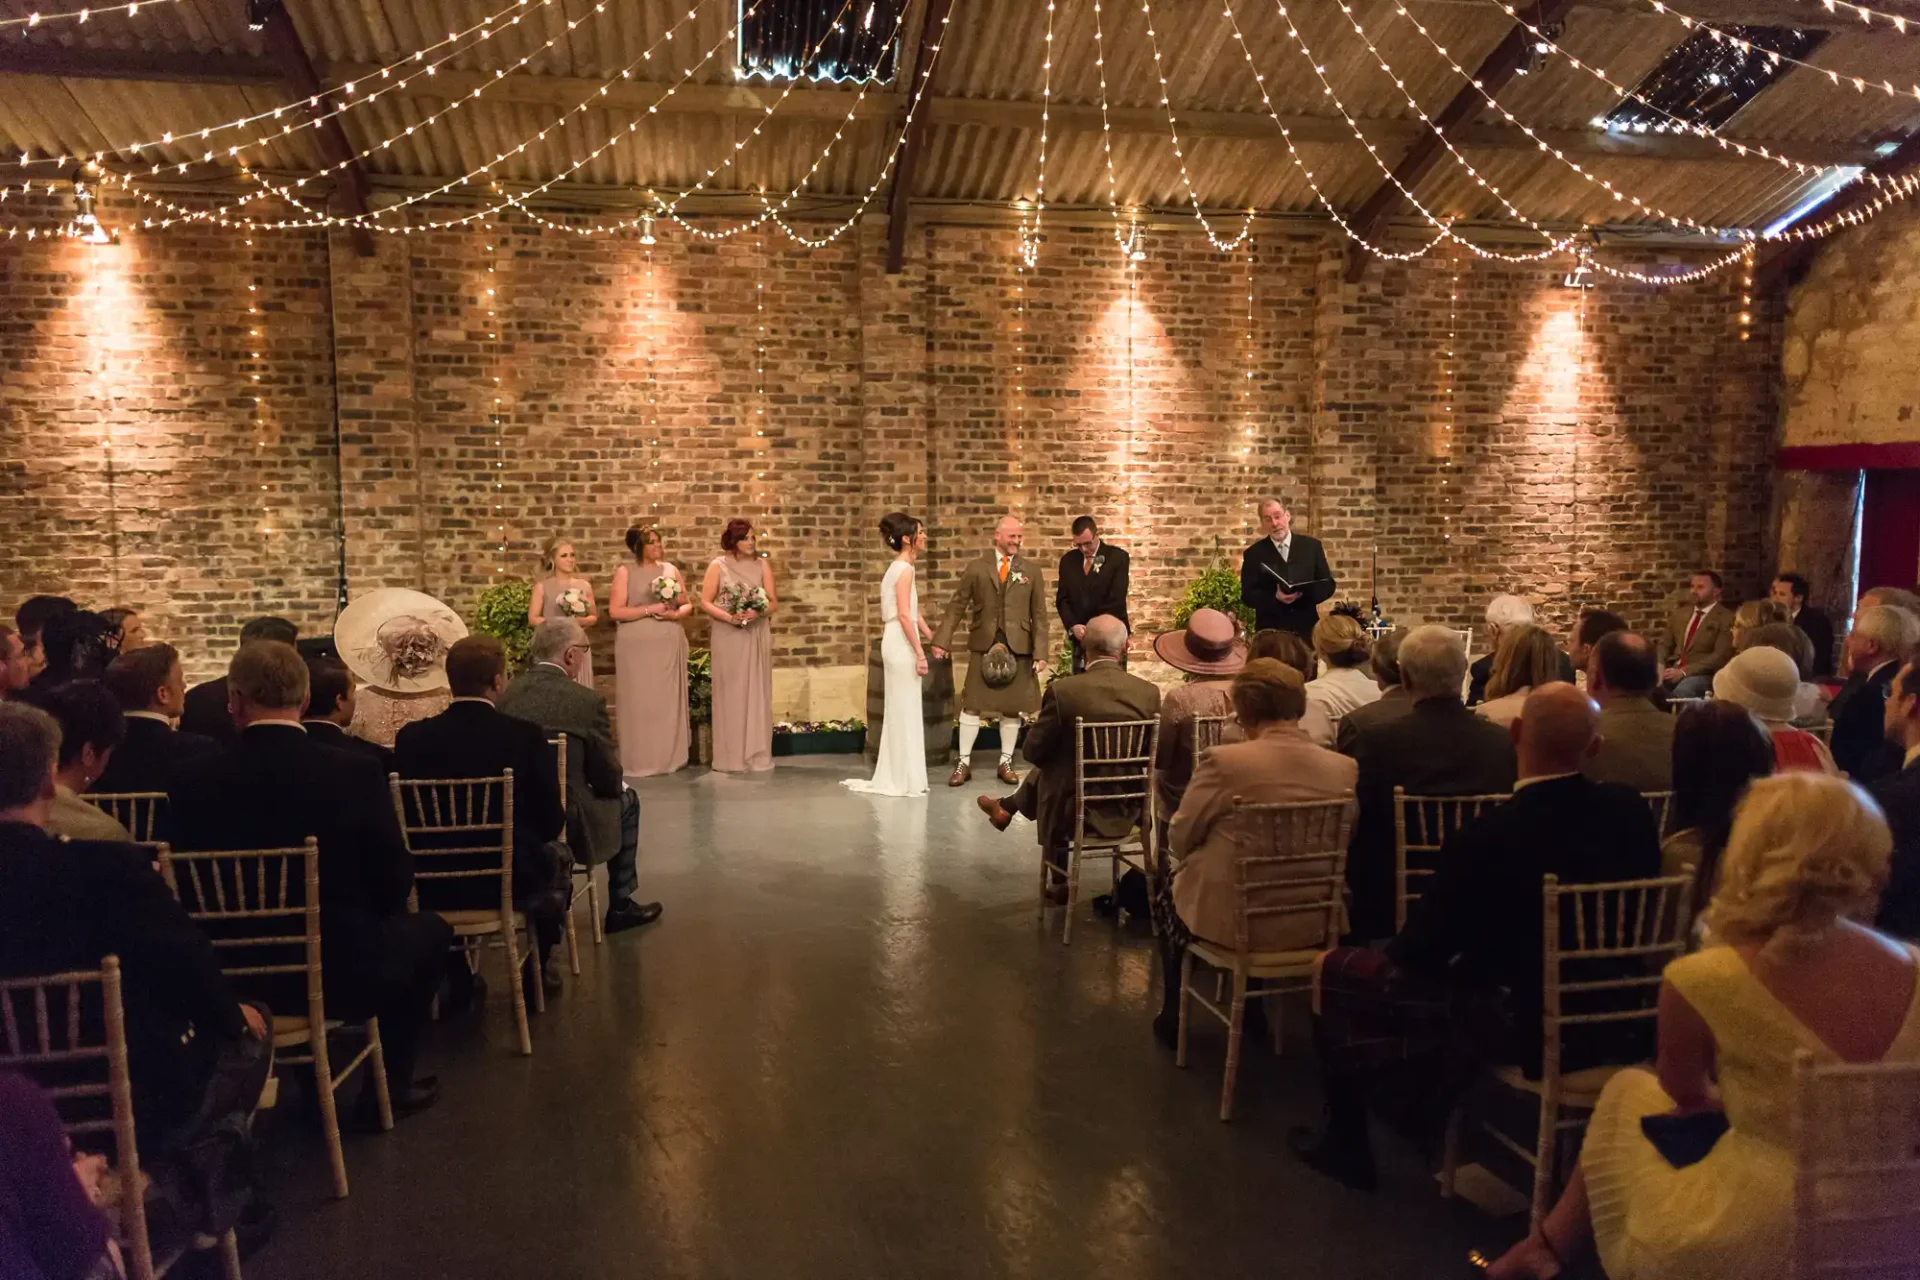 A wedding ceremony in a rustic venue with brick walls and string lights, featuring a couple at the altar, surrounded by guests.